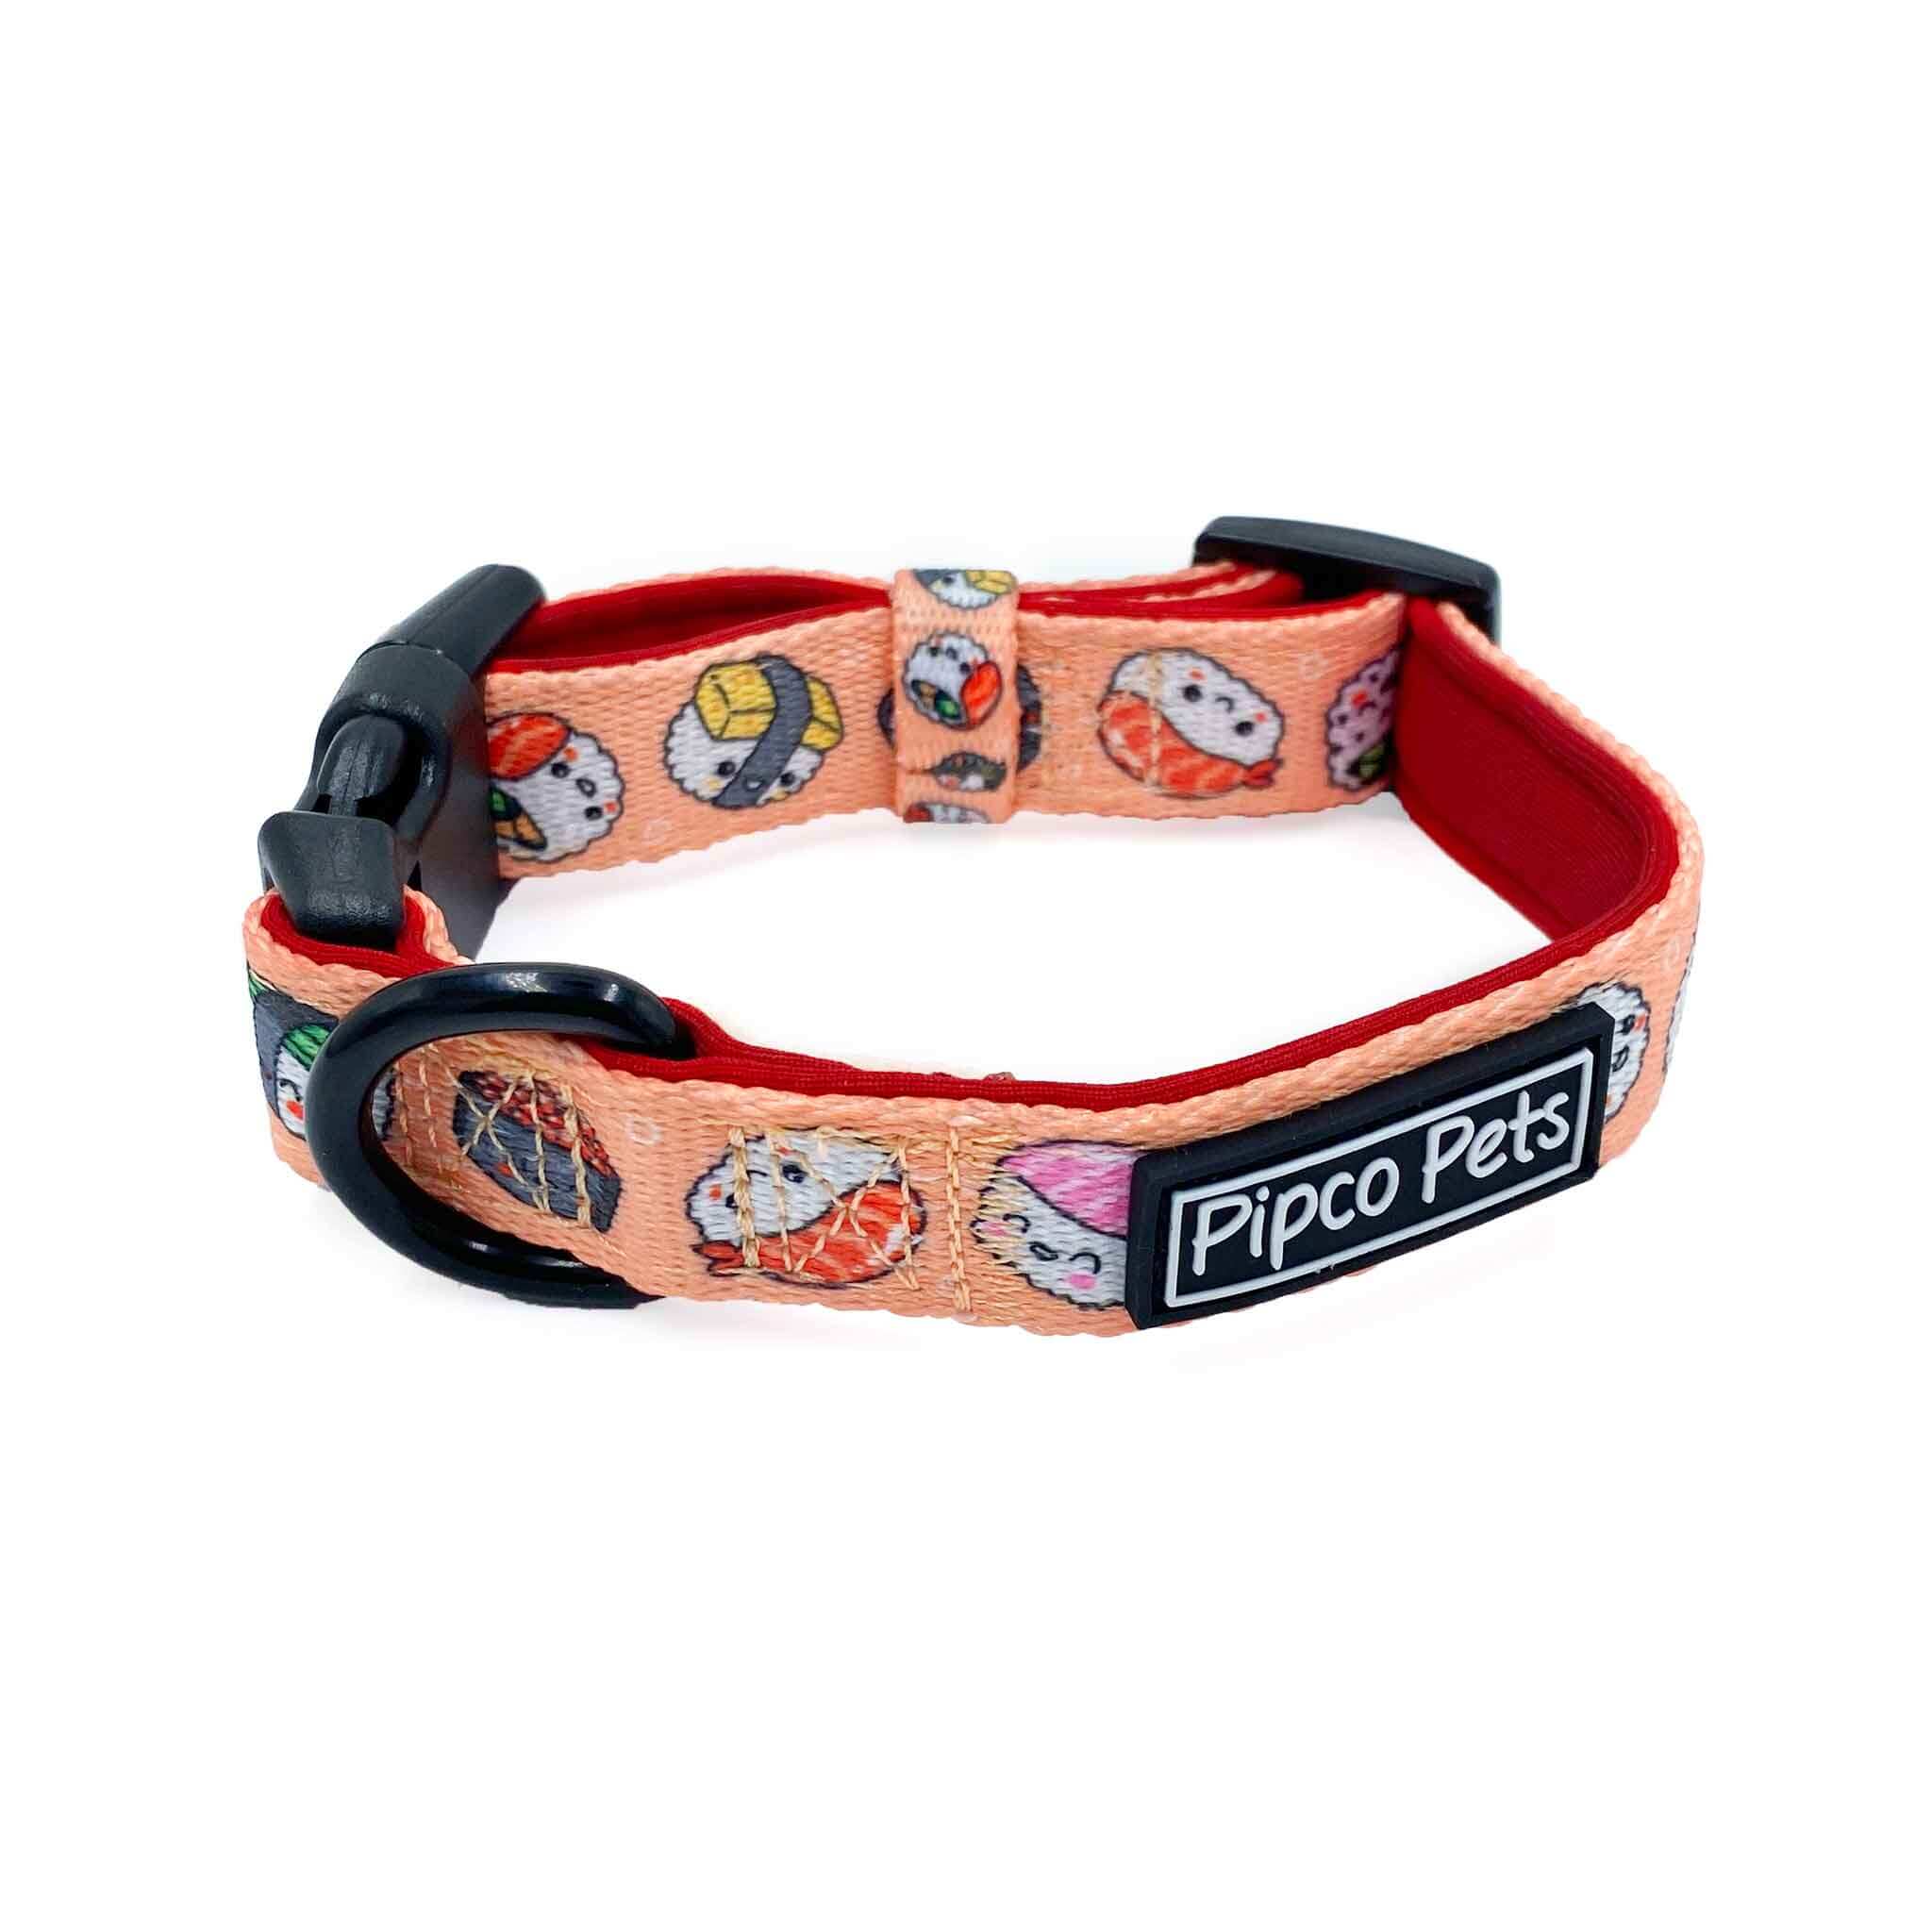 Pipco Pets dog collar with Sushi Train print pattern in pink